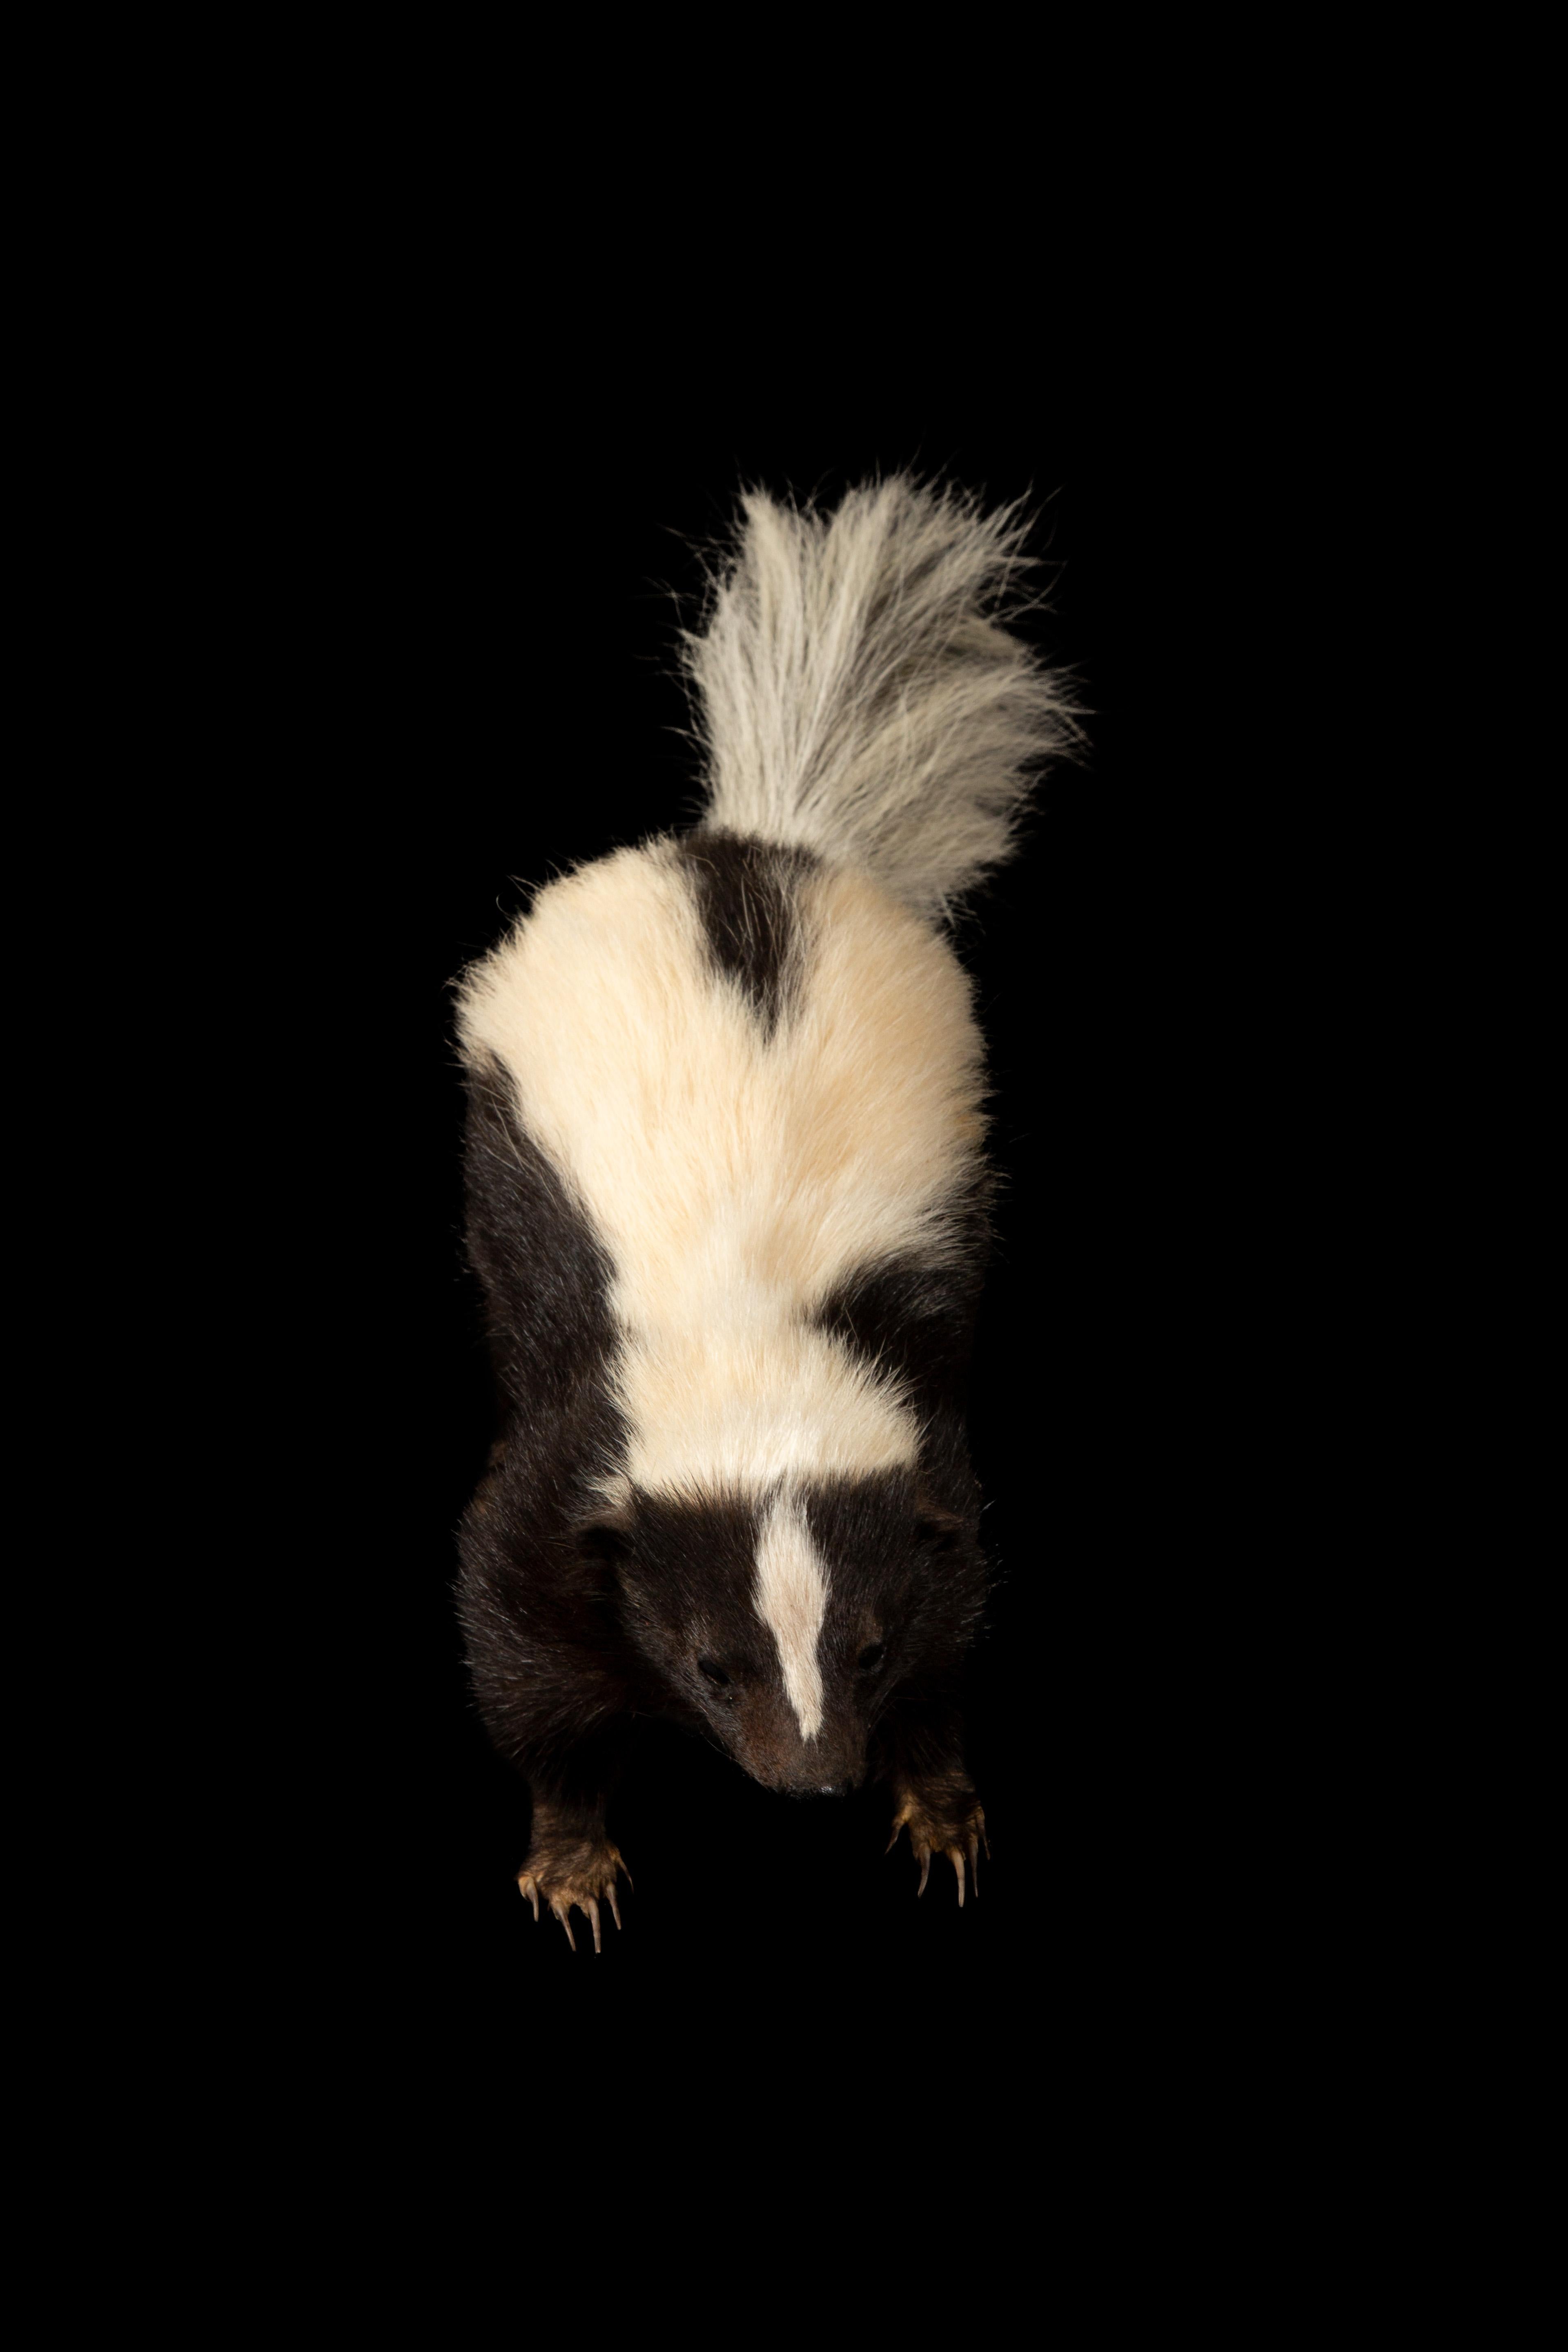 American Charming Pepe le Pew: Black and White Taxidermy Skunk Delight For Sale